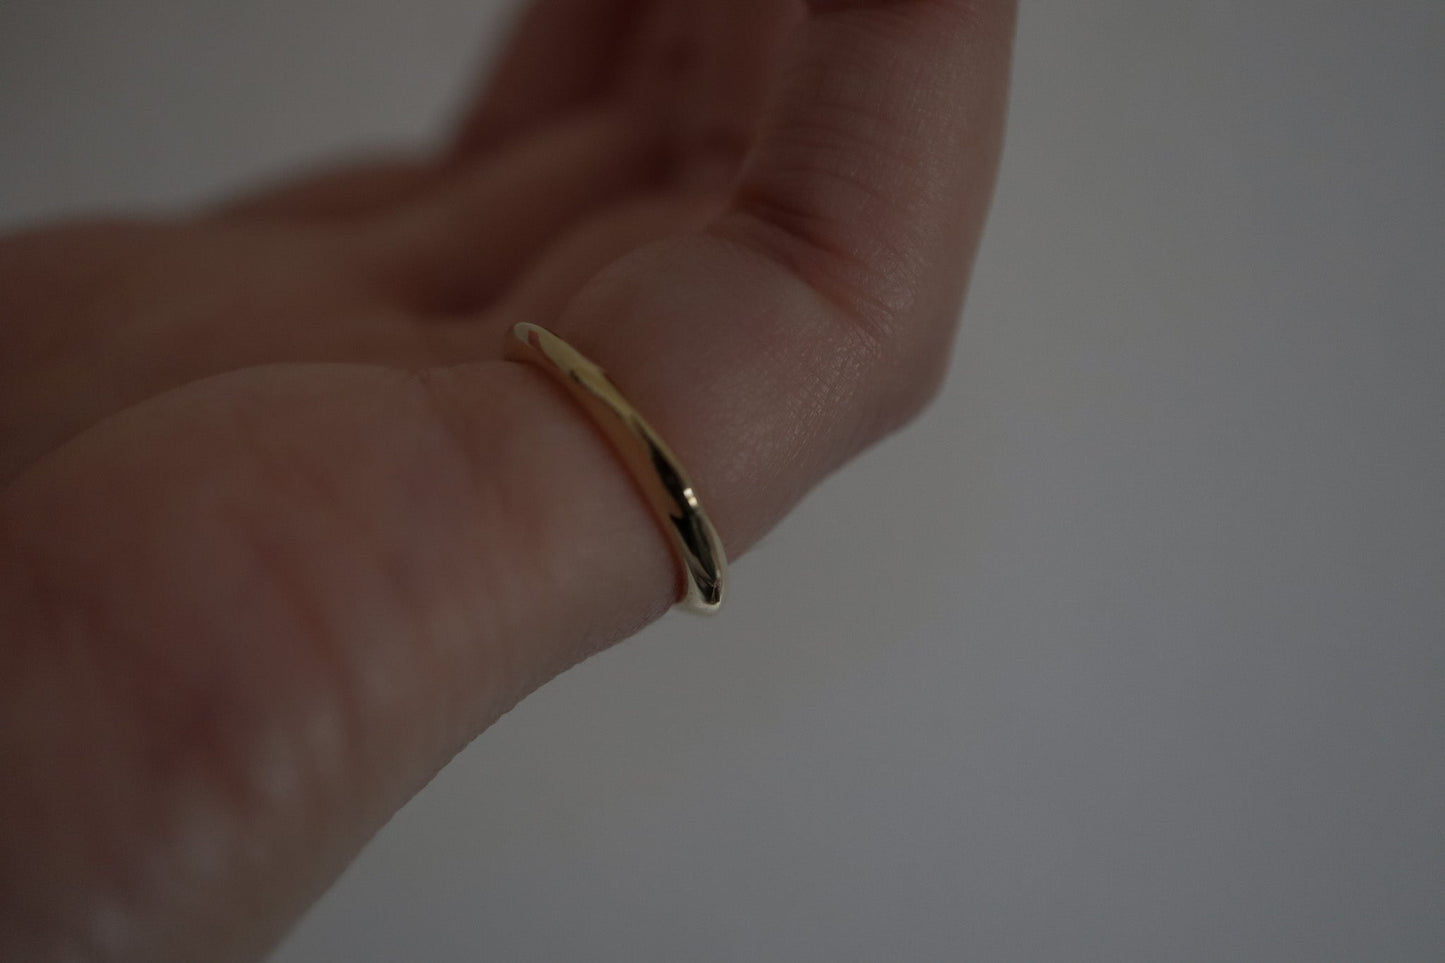 Pinky layered ring / thin / silver / gold